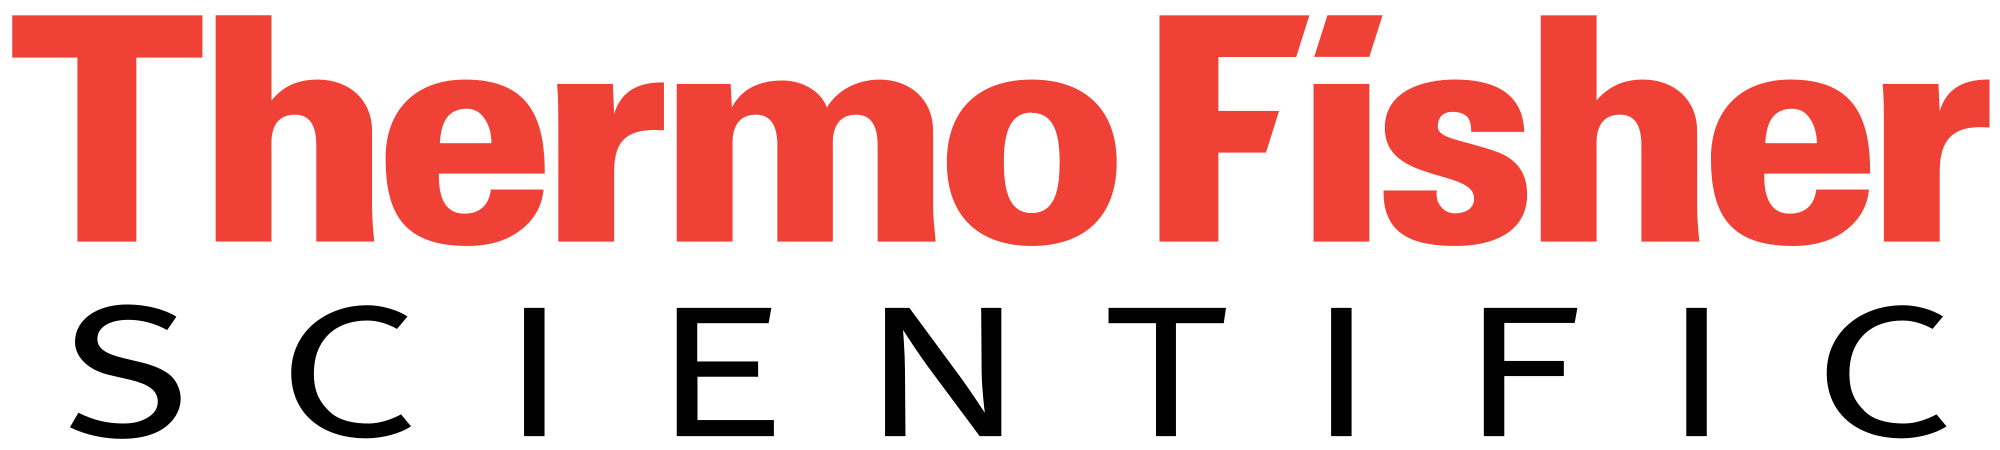 2017-11/sponsor-image-thermo.png